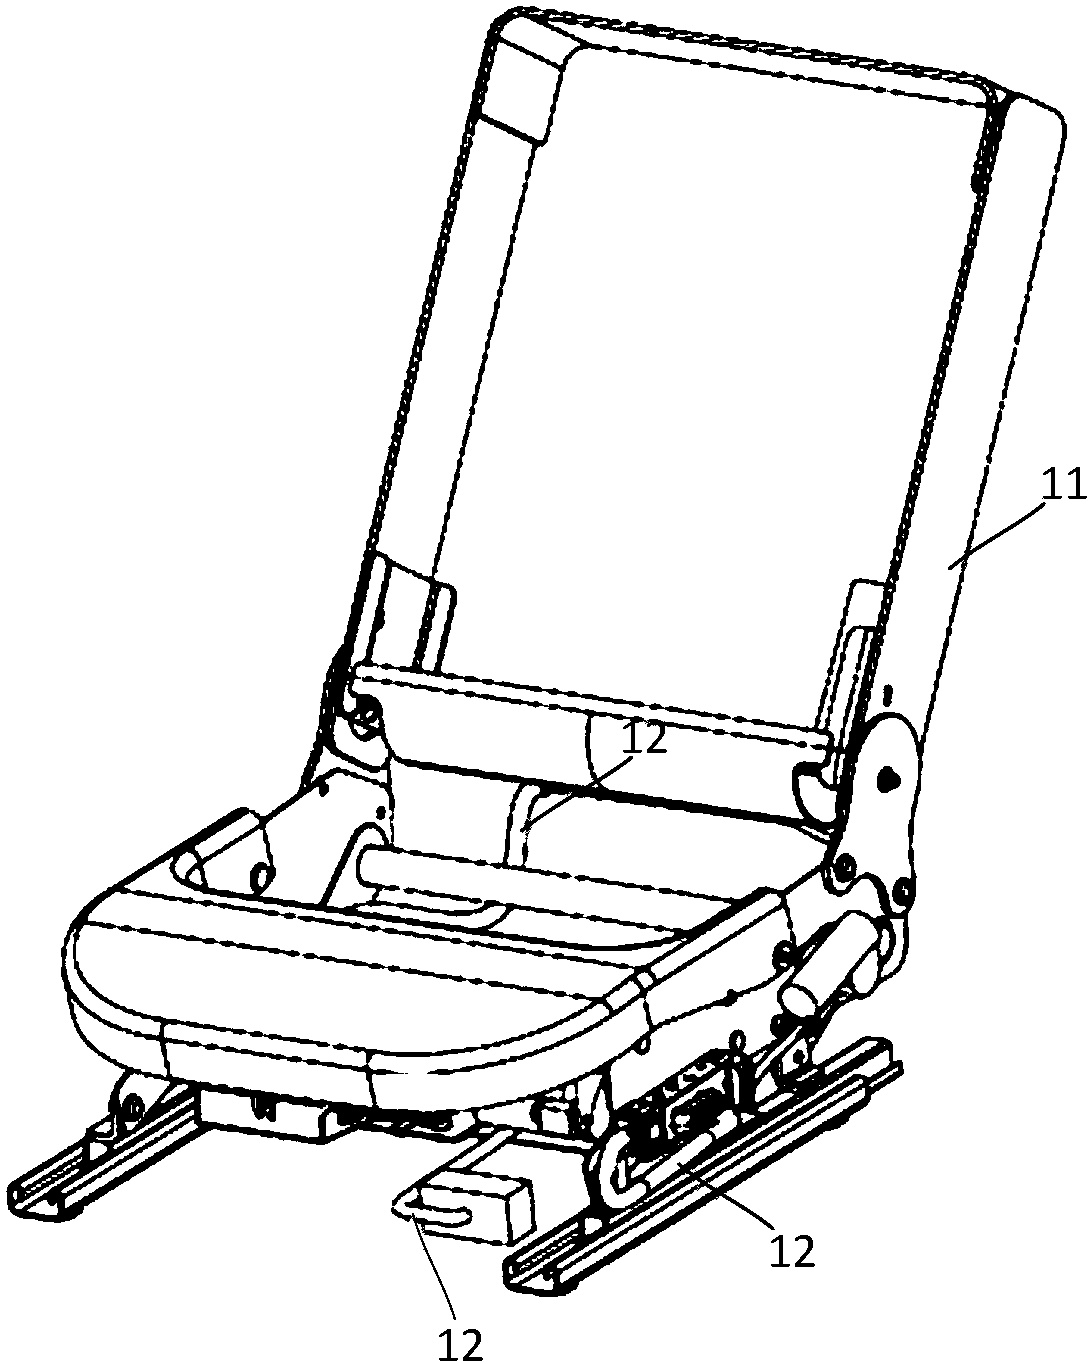 Car seat without wire harness